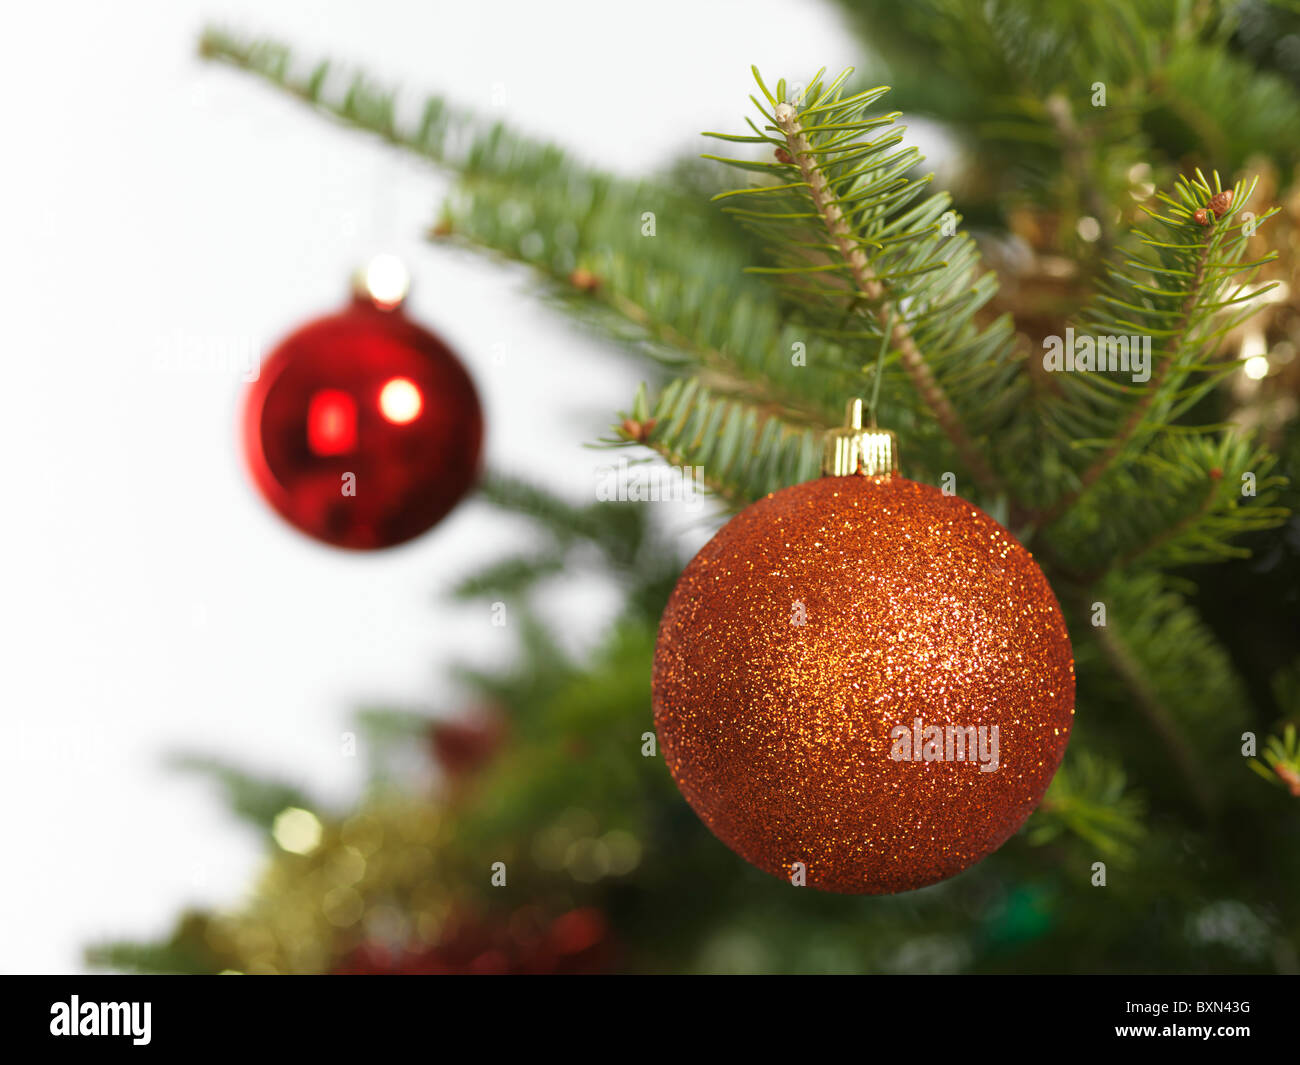 Colorful ornament on a Christmas tree isolated on white background Stock Photo